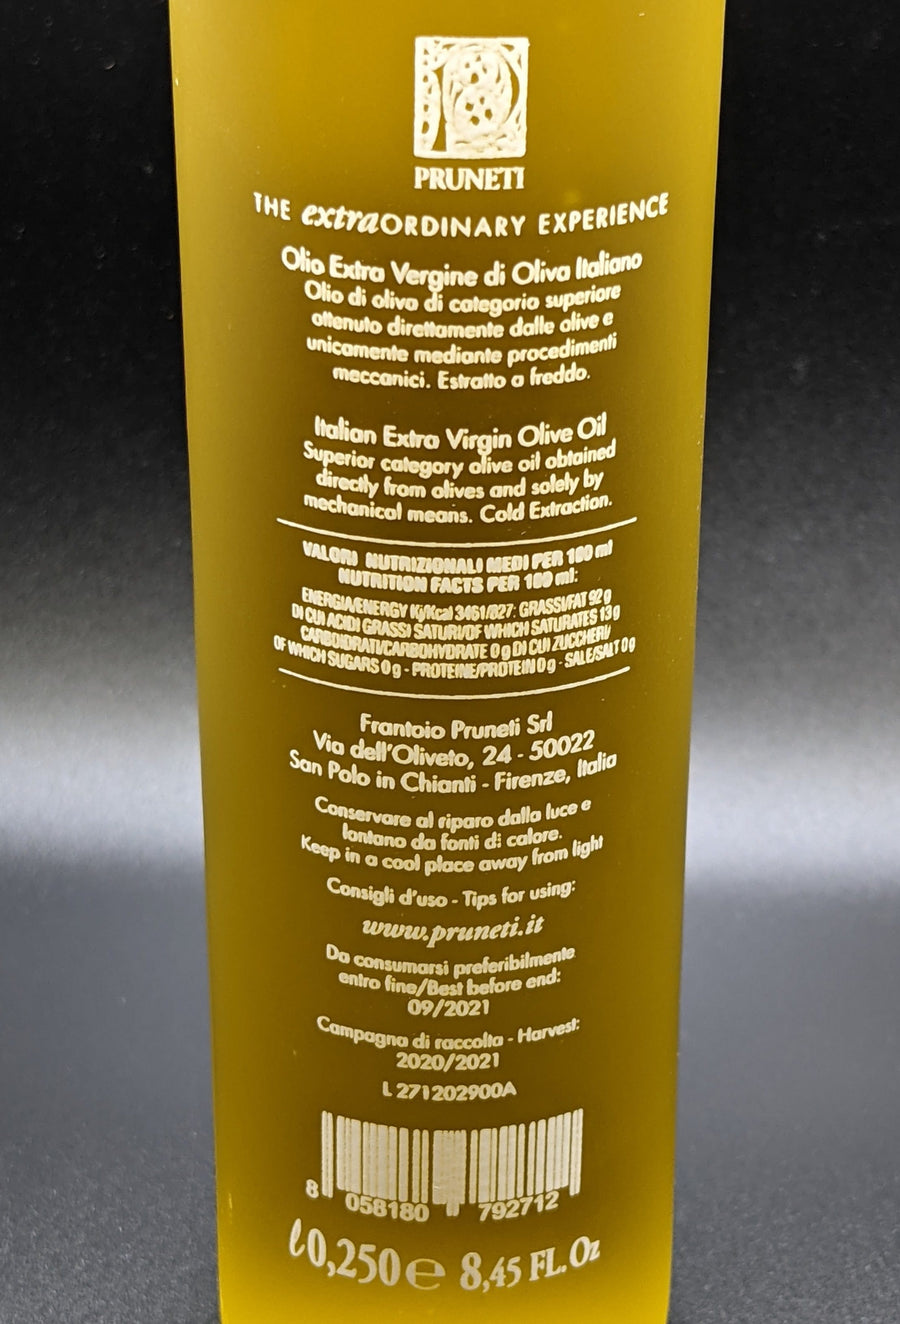 RealGourmetFood.com Olive Oil Pruneti Nuovo Extra Virgin olive Oil Italy